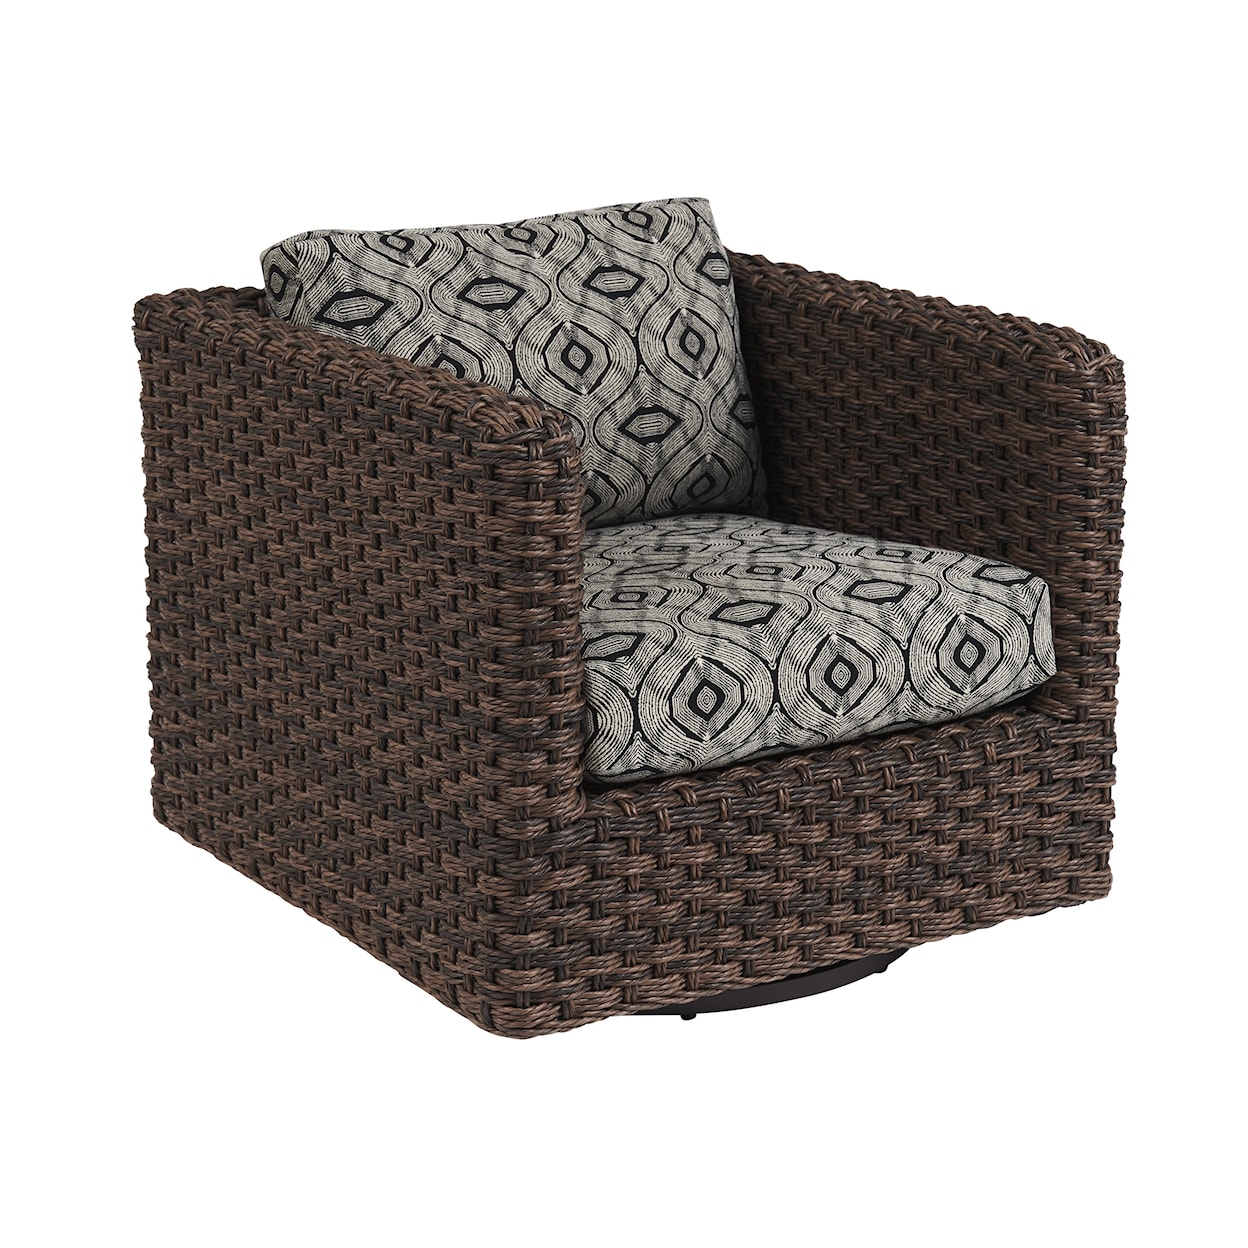 Tommy Bahama Outdoor Living Kilimanjaro Swivel Glider Lounge Chair